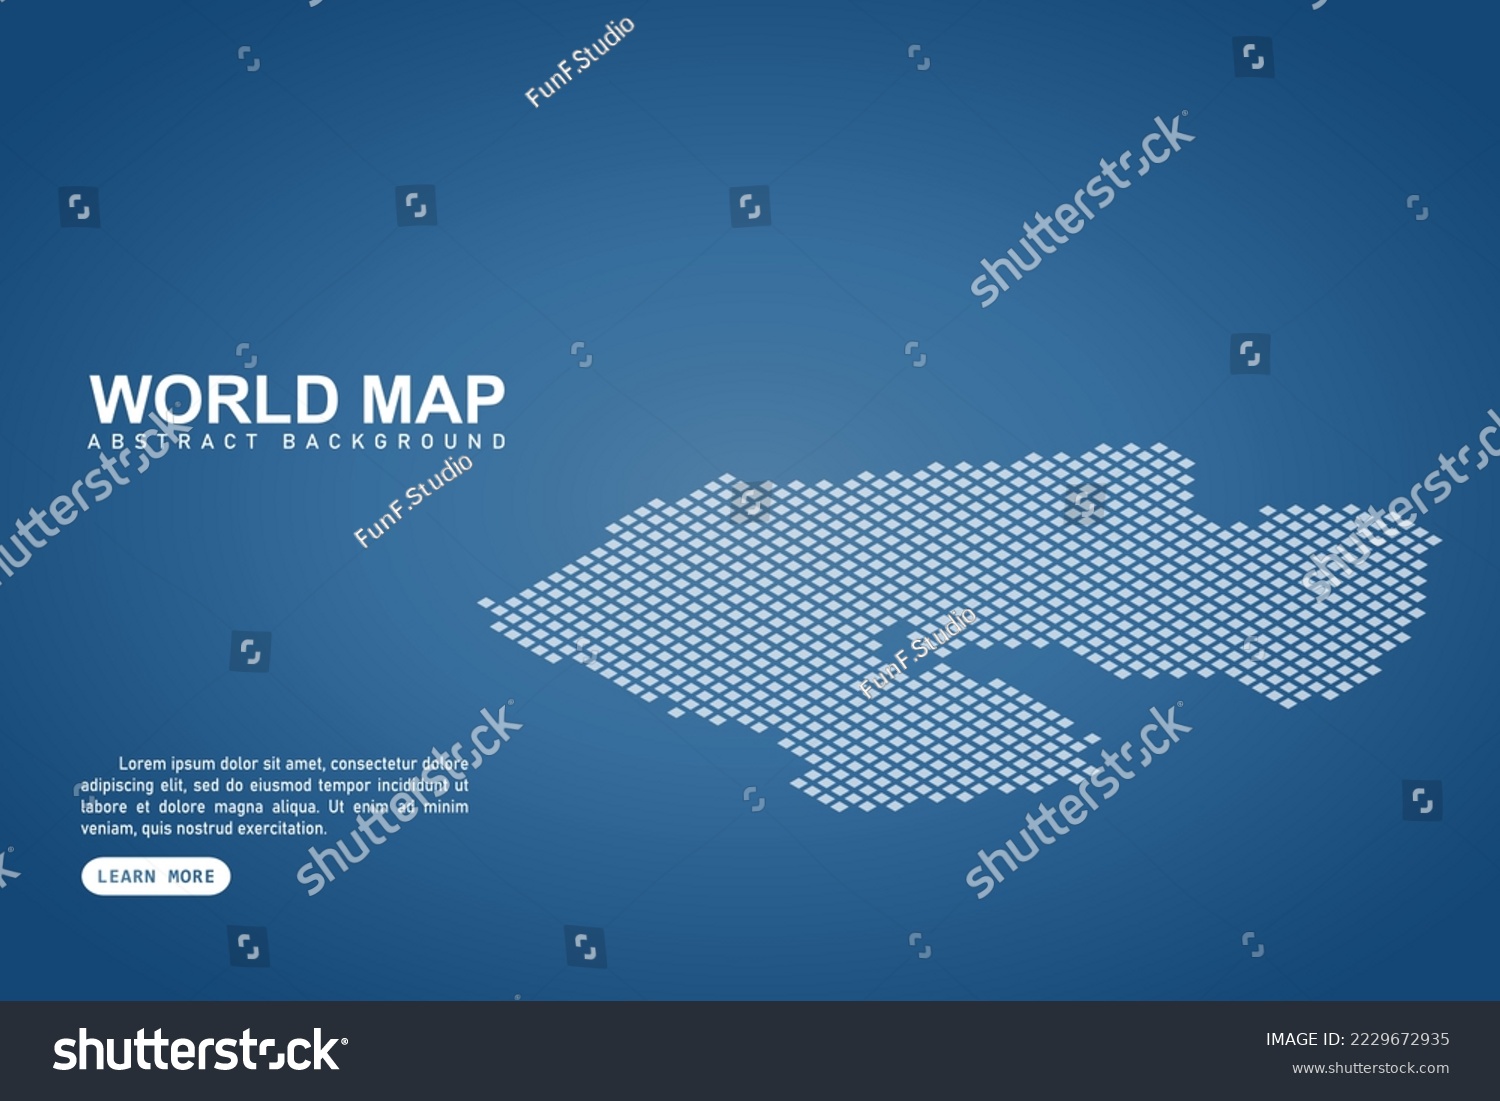 SVG of Djibouti Map - World map International vector template with isometric top and white pixel, grid, grunge, halftone style isolated on blue background for design, web - Vector illustration eps 10 svg